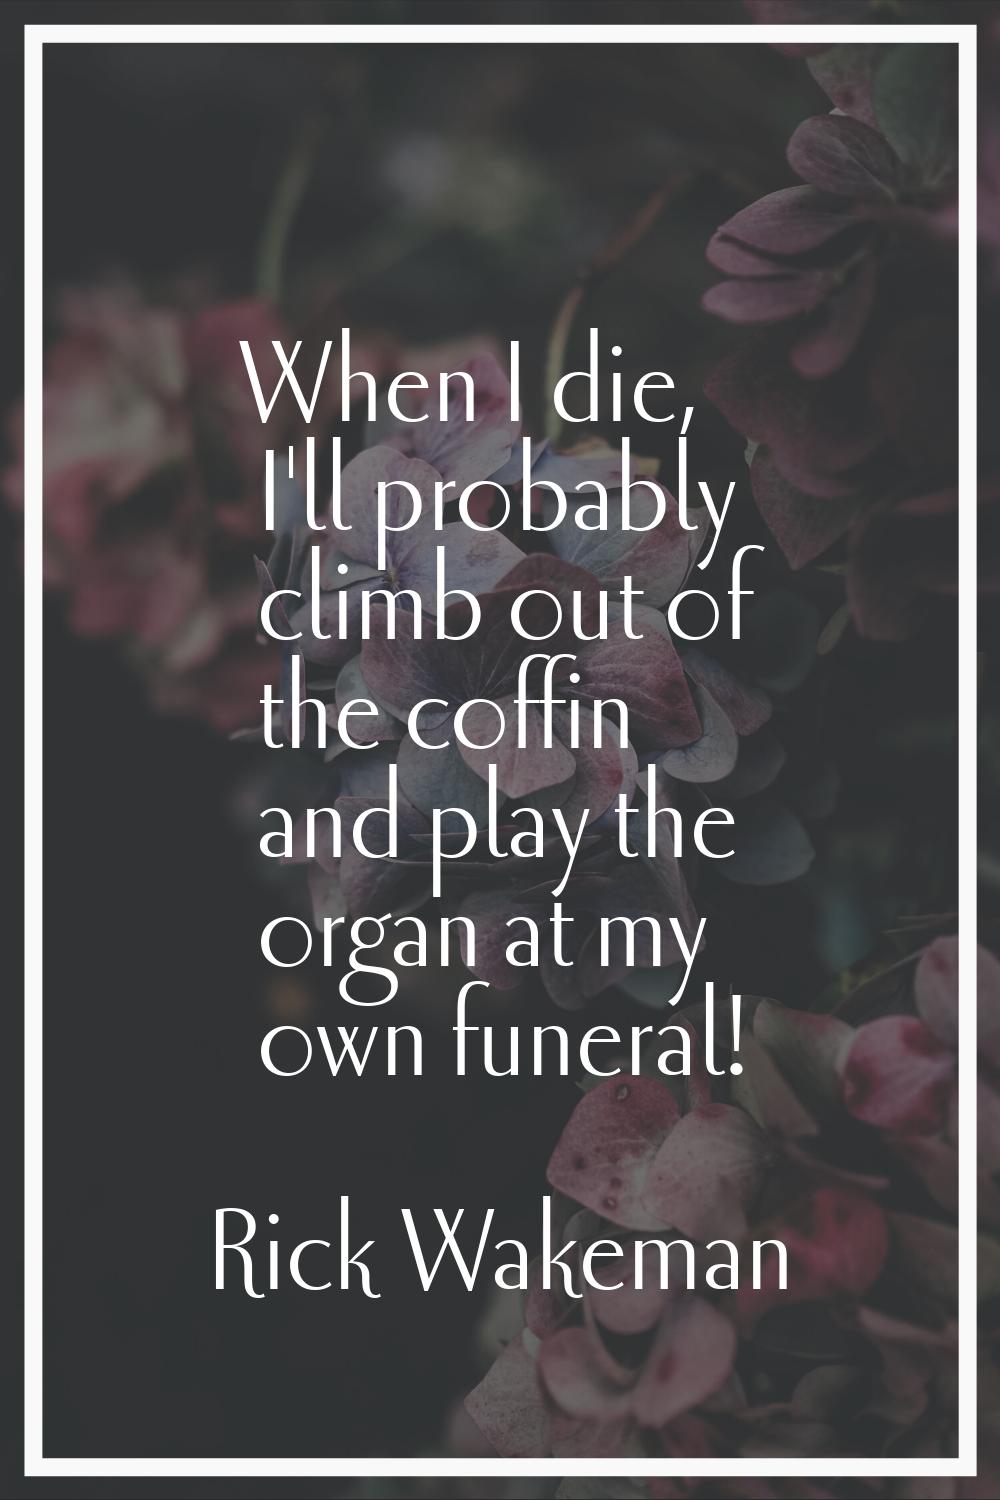 When I die, I'll probably climb out of the coffin and play the organ at my own funeral!